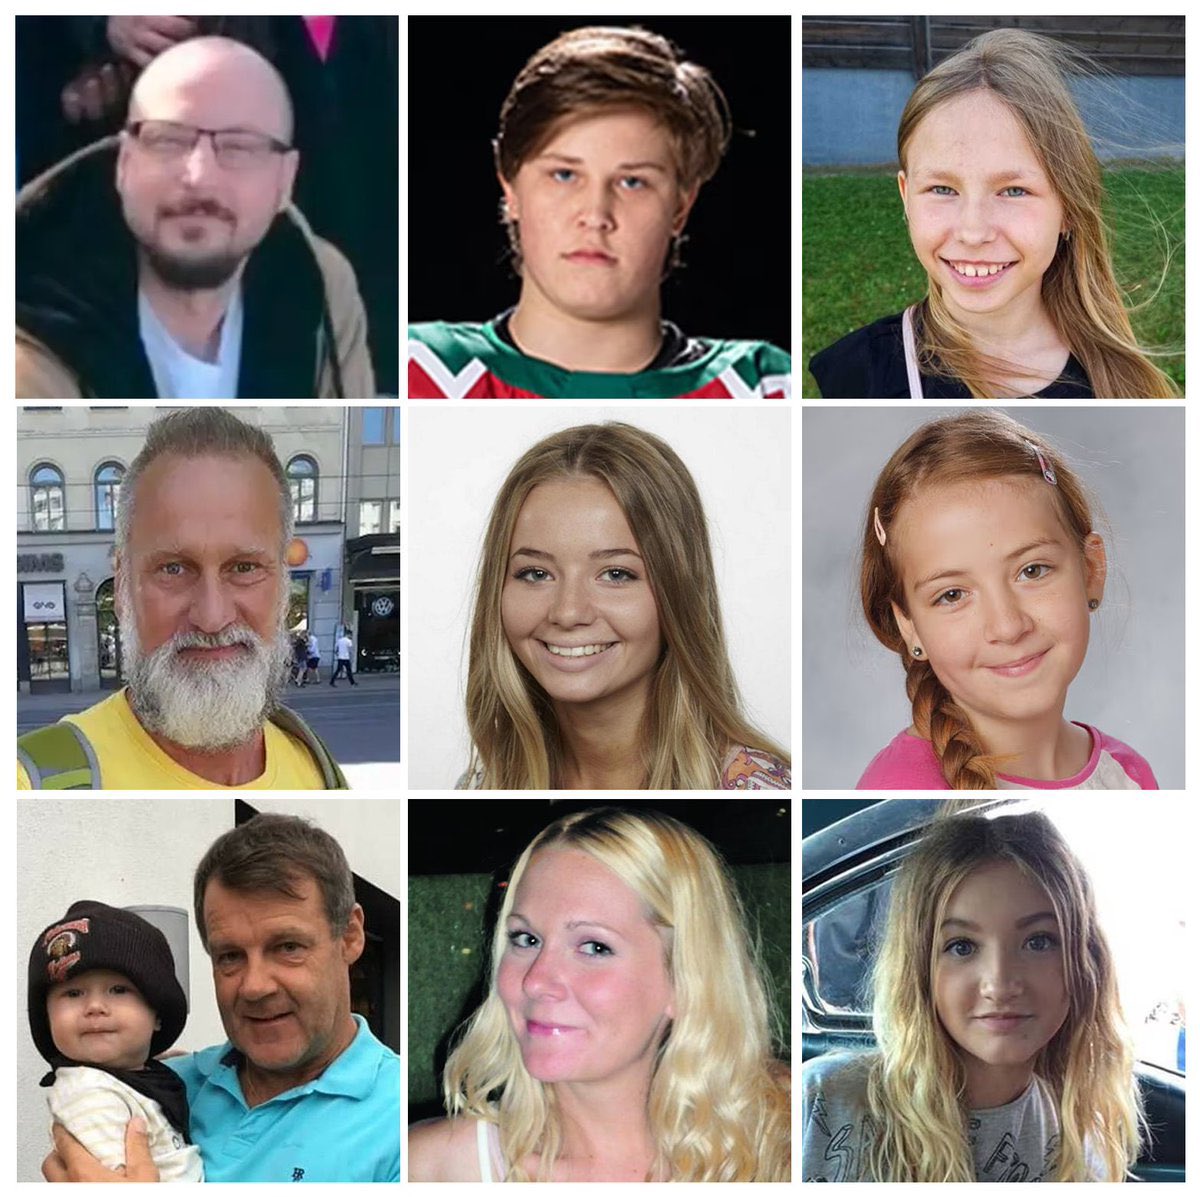 Mikael 39, Henrik 15, Luna 9, Fredrik 54, Lisa 17, Ebba 11, Kjäll 57, Elin 27, Wilma 17... the list can be made much longer but these are just a few of those who recently have been murdered in Sweden by the immigrants that our political establishment have imported. While those